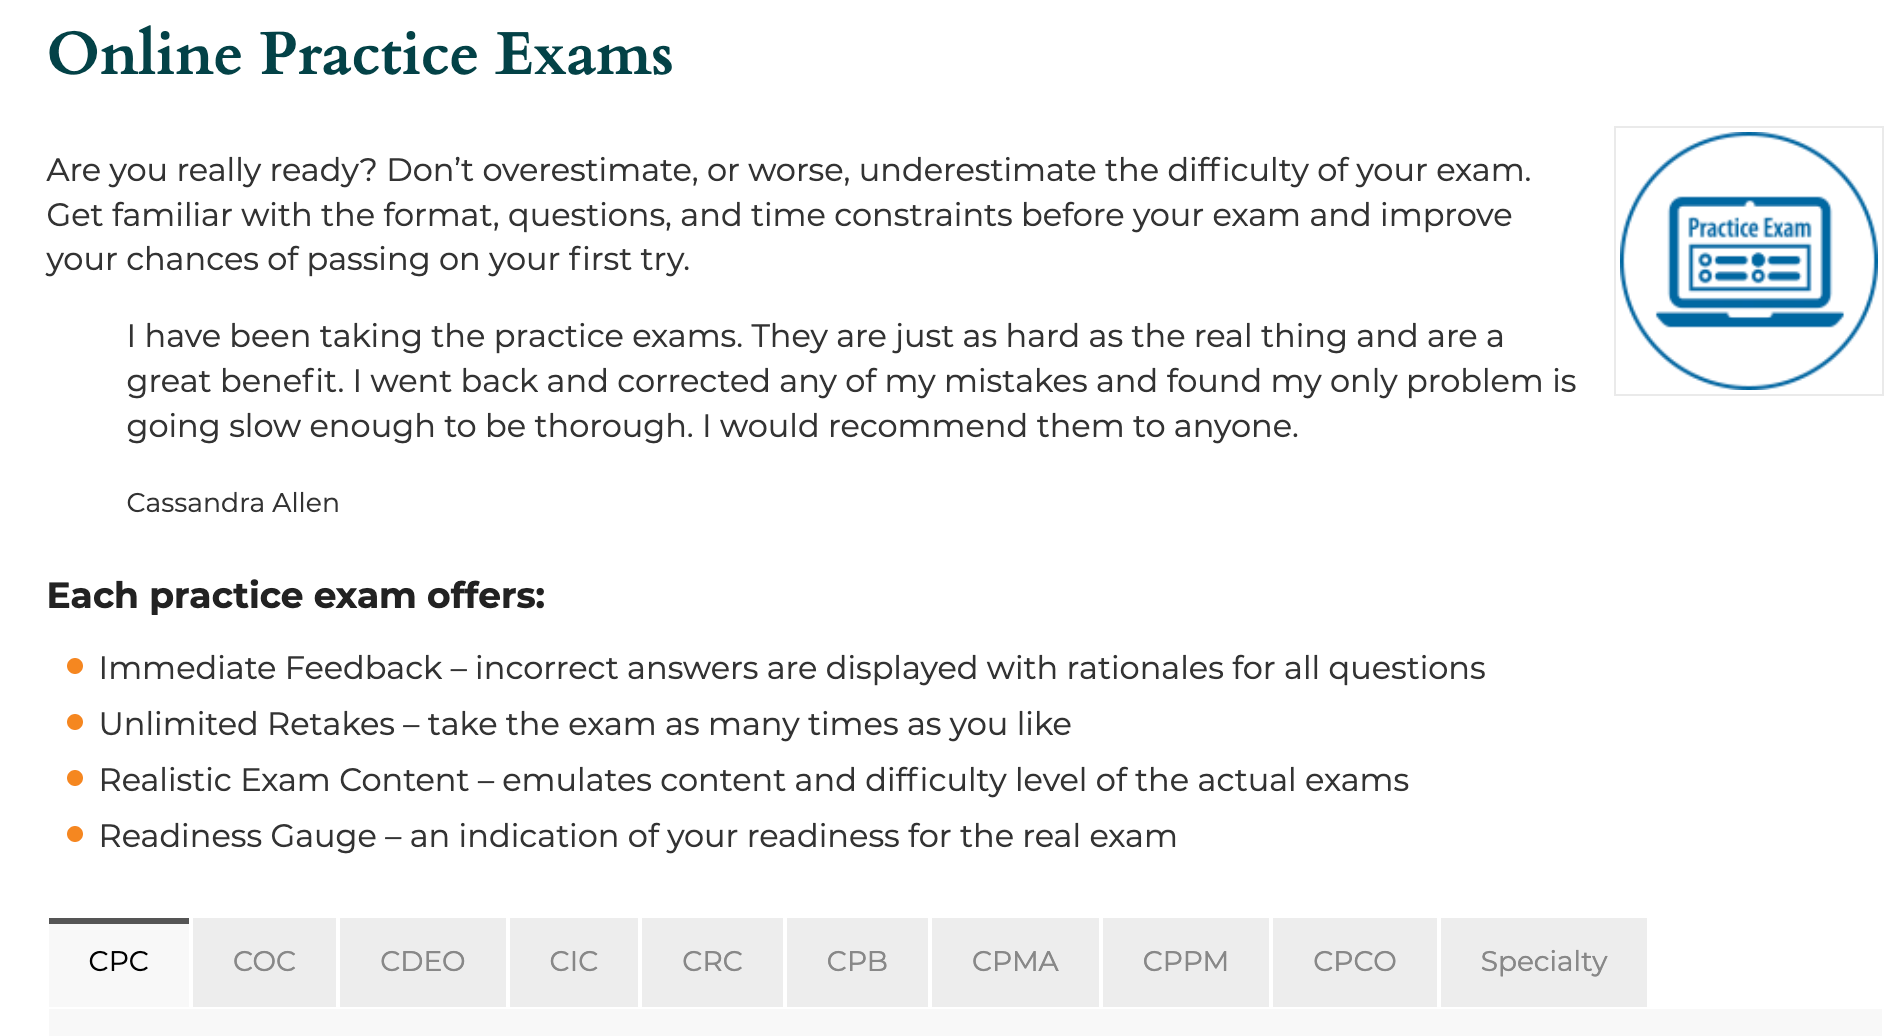 The AAPC offers 3 official practice tests you can take online for $79.95.